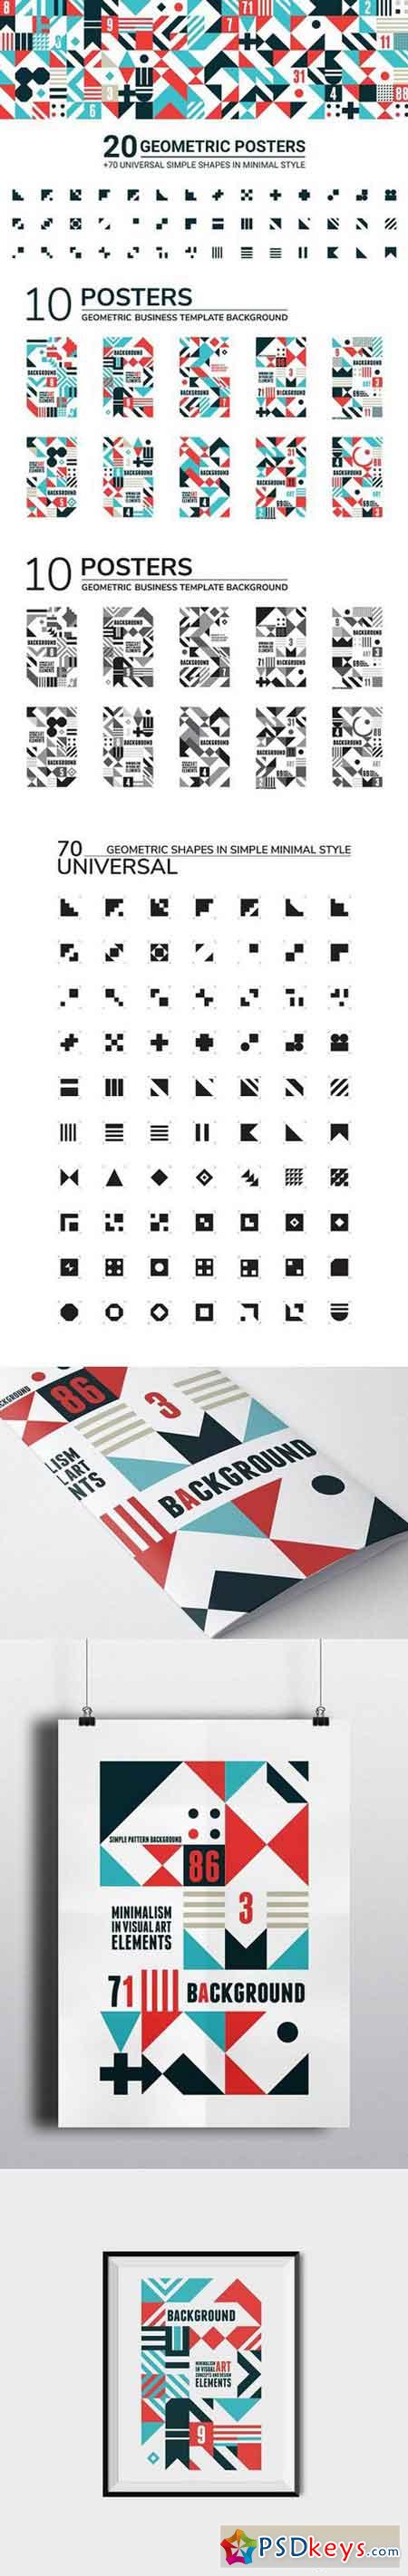 20 GEOMETRIC POSTERS & 70 SHAPES 1174725